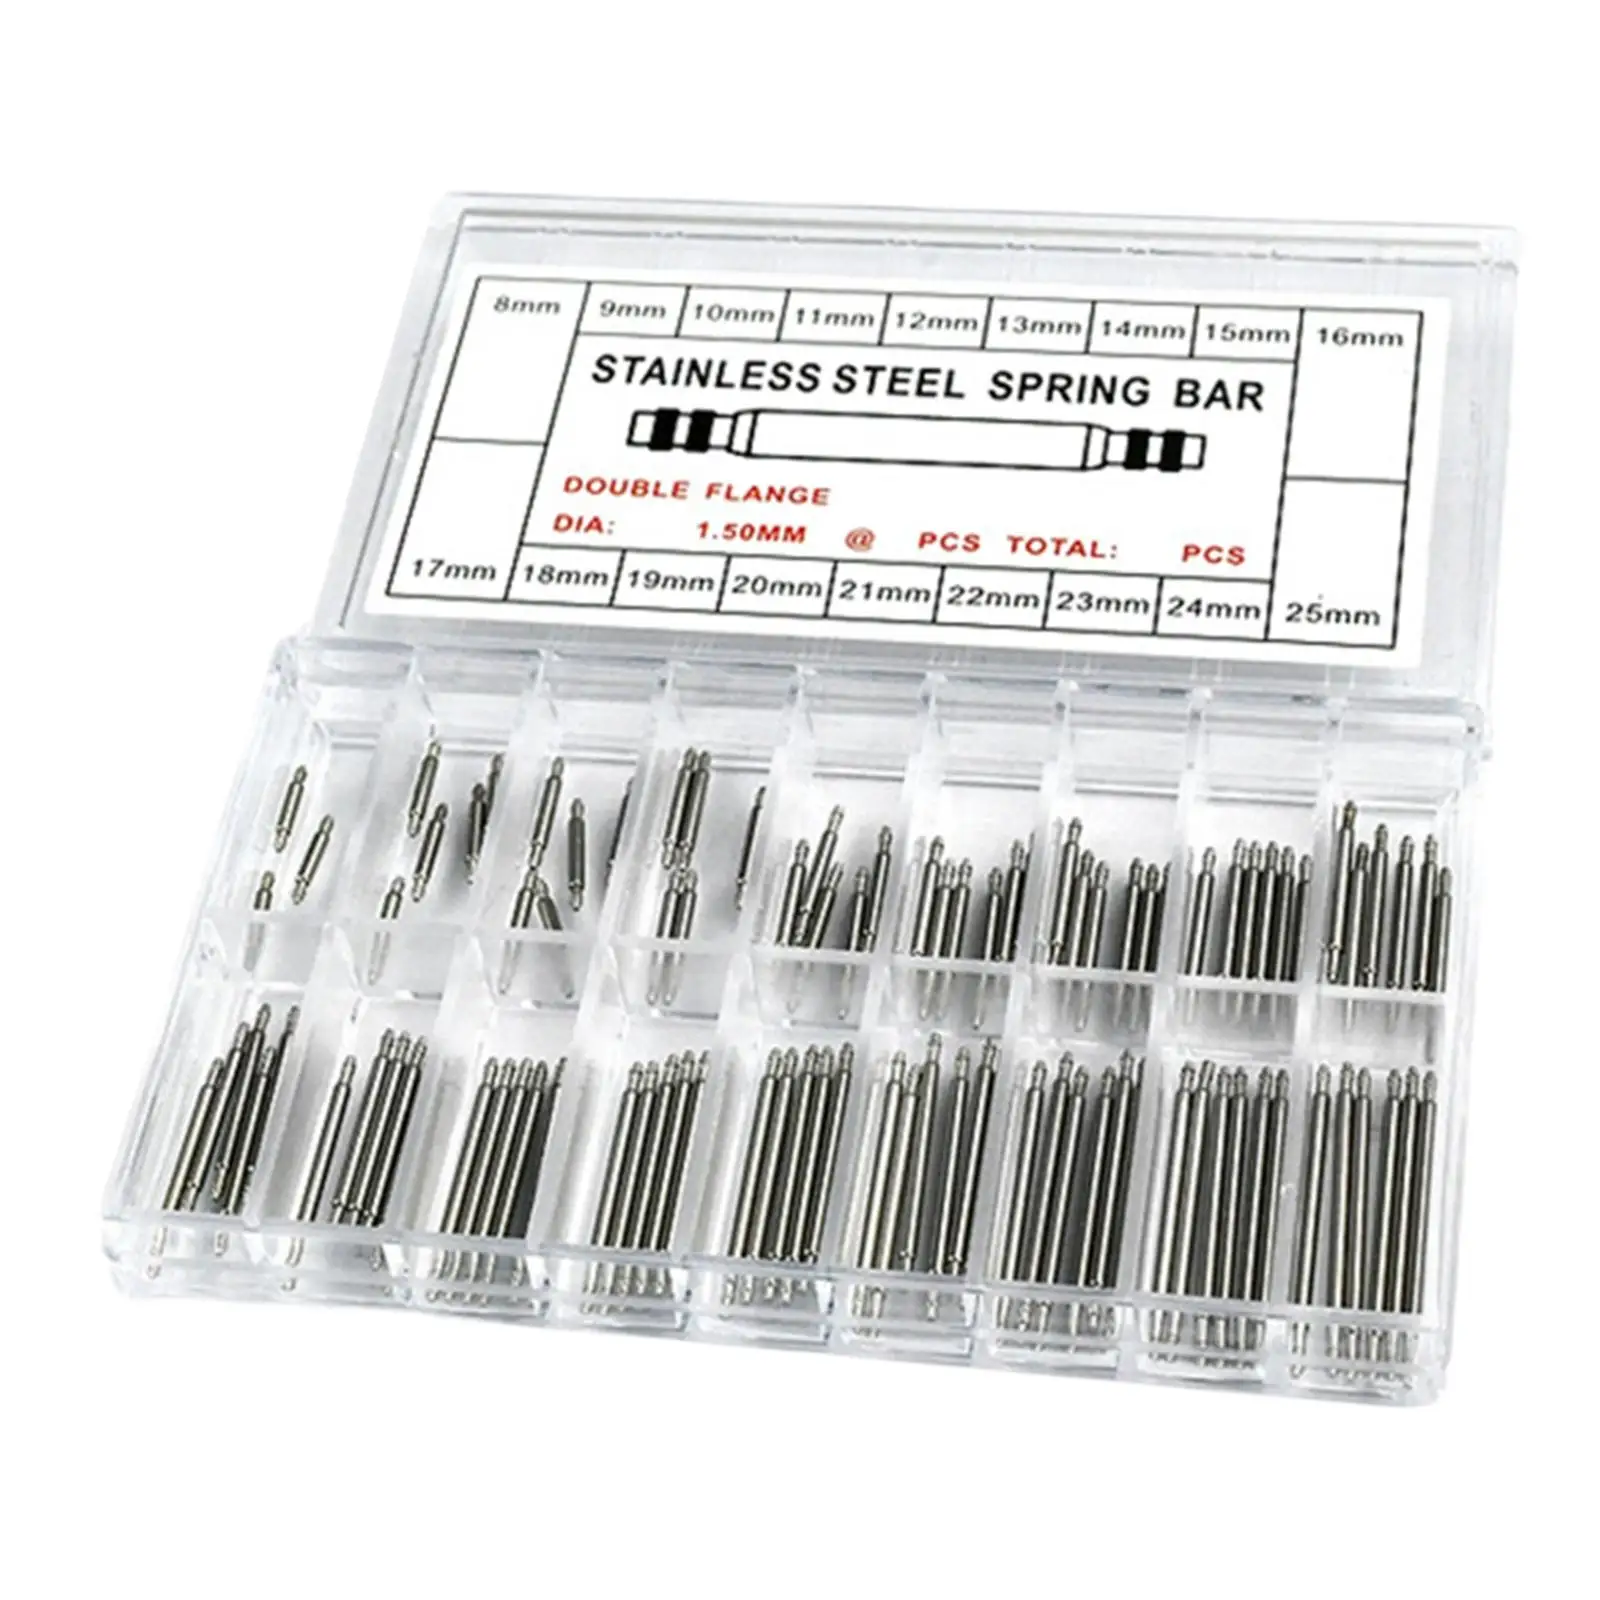 144x Watch Band Spring Bars 8-25mm Release Repair Kit Replacement 18 Different Sizes